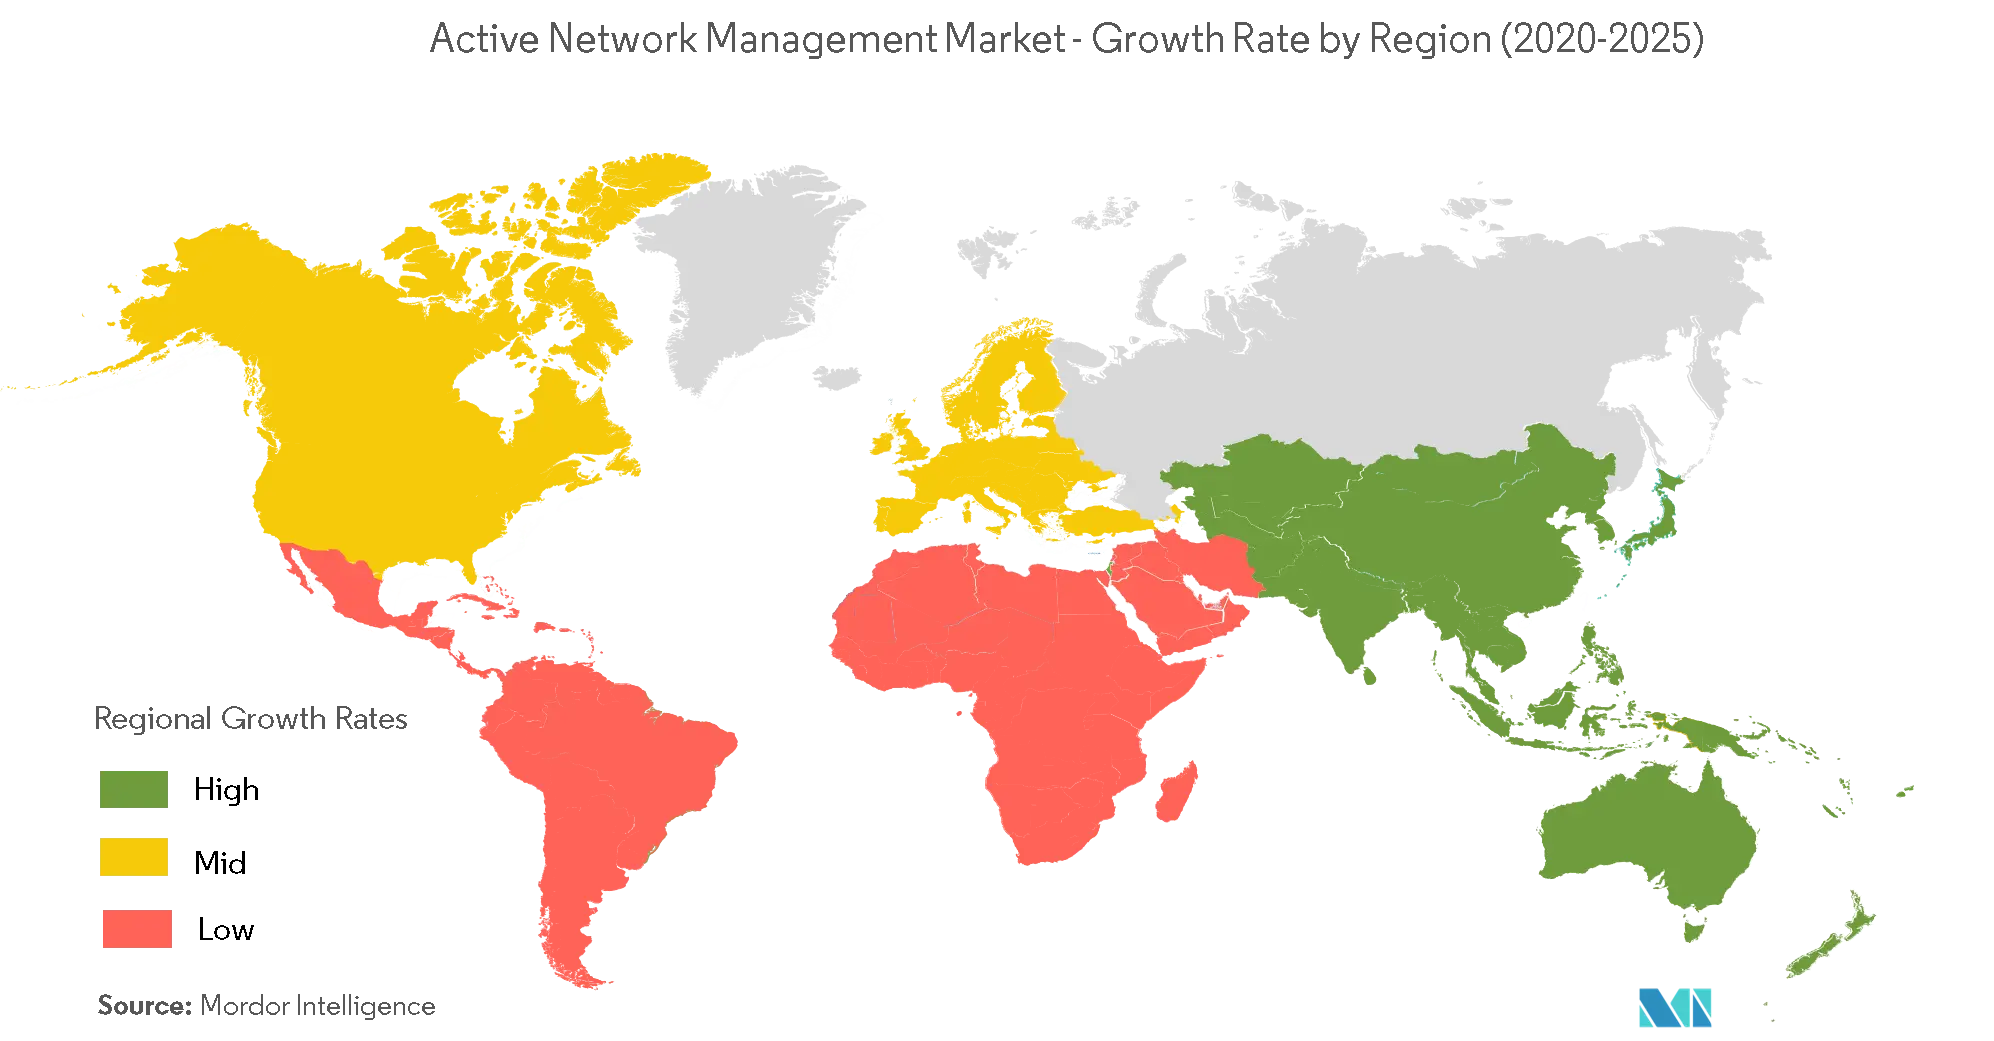 Active Network Management Market- Growth Rate by Region (2020-2025)